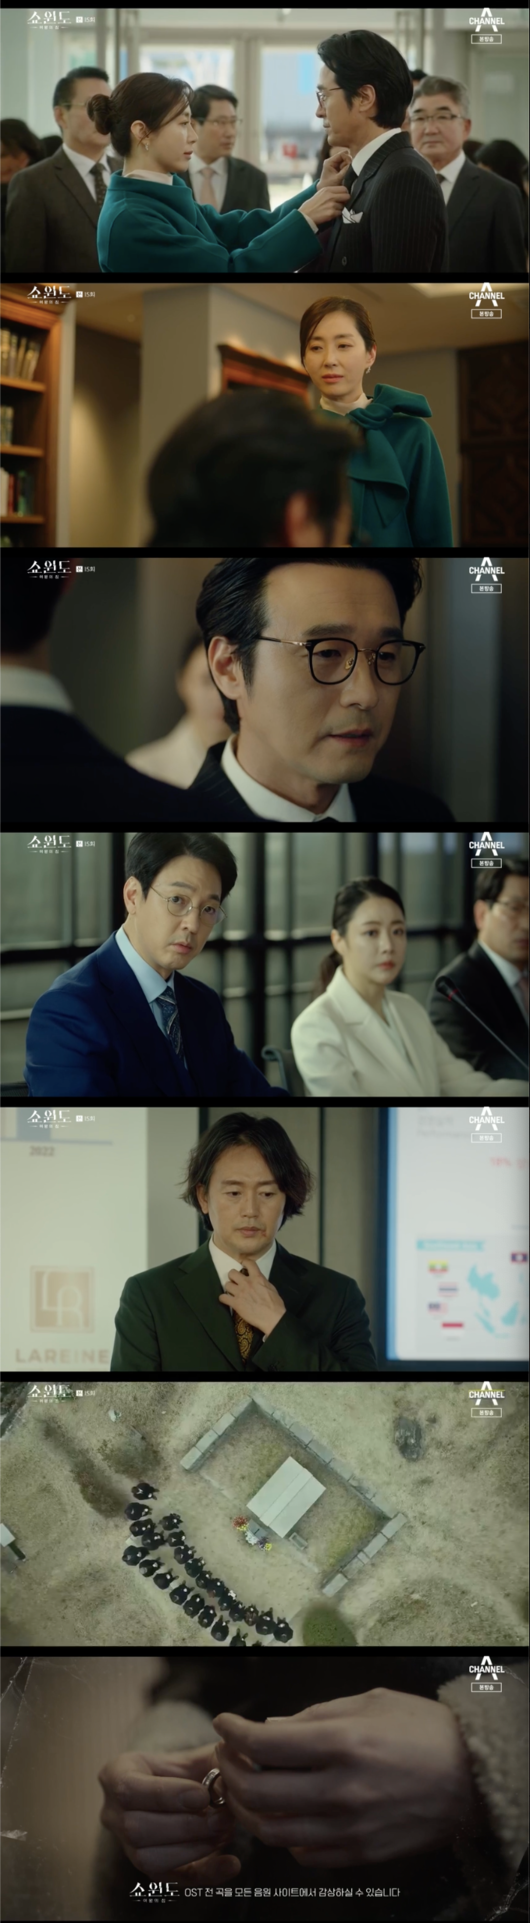 Showwindow: The Queens House Song Yoon-ah gave Lee Sung-jae his last greeting.In the channel A 10th anniversary special drama Showwindow: The Queens House (playplayplay by Han Bo-kyung, Park Hye-young / directed by Kangsol, Park Dae-hee), which was broadcasted at 10:30 pm on the 17th, the image of Shin myeong-seop (Lee Sung-jae) who is on the position of President Rahen was broadcast.On this day, Shin myeong-seop told Ahn Do-hyuk (Kim Young-joon) and JS Jewelry representative Lee Jun-sang (Kim Jung-tae) that I will be in the position of chairman of Rahen Group.Watch how I do it, he said.Shin myeong-seop suggested Han Seon-ju take a drink of Harvey Weinstein, and took medicine to Han Seon-jus Harvey Weinstein.Han Seon-ju, who does not know this fact, drank Harvey Weinstein, saying, Now everything will come back to its place.Han Seon-ju, who finished Harvey Weinstein, fell asleep and Shin myeong-seop was buried with a finger print on a knife that stabbed Yoon Mi-ra.Kim Kang-im told Shin myeong-seop, You and Yoon Mi-ra, who made my precious daughters heart bruise and touched my poor son, are not cool to change.I do not fit your fountain, but I will take one arrear with alimony. You cant eat an aperal and fall off? I cant do that. He said, Do you think Rahen is the president? Ill tell you.Rahen is mine, not Chairman Kim Kang-im, but this shin myeong-seop. Nobody but me can be Rahens owner.Shin myeong-seop showed Kim Kang-im a picture of a bloody weapon, and said, Yoon Mi-ra is the shipowner.Shin myeong-seop, who does not believe this, said, The fingerprints on the knife of the crime tool match the Han Seon-ju.Would you like to submit the knife and documents to the police? said Shin Myeong-seop, pressing Kim Kang-im. I will protect the ship owner.Kim Kang-im, who was shocked, called Han Sun-ju and said, Is not it you? He handed me a picture of the knife and an appraisal that Shin myeong-seop gave him.The gentleman brought it with him, saying it was evidence that you were the one who stabbed him. He brought this evidence and told me to hand over Rahen.Han Seon-ju, who learned all the facts, shivered and said, Please do what Shin myeong-seop wants. It will eventually be the way to save Rahen.Eventually, Shin myeong-seop took the post of chairman; Han Seon-ju told Shin myeong-seop, I finally dreamed, its great.I wanted to see you sit down as chairman, he said.Shin myeong-seop, who attended the executive meeting, recalled the intellectual and shame he had received from Kim Kang-im in the past.He laughed and asked executives, Is there any problem with the supply and demand of raw materials from Southeast Asian factories?I am confident that the supply and demand of raw materials, which was raised during the last strike, will not happen again.Lets get some tension. Its not the permanent guarantee of where youre sitting. Remember, if you dont have a performance, you can be relentless.Try hard enough to break your knees and bring out your visible achievements. Do not be proud and try constantly. On the other hand, at the end of the broadcast, the scene of Han Seon-ju being attacked by a gunman was predicted, and in the last scene, the funeral scene along with the picture of Shin myeong-seop, along with the picture of the song, raised the curiosity about the words of Shin myeong-seop.In the preliminary announcement, Han Seon-jus Goodbye to the Girl voice was added and the Shin myeong-seop death was weighted.Channel A Showwindow: Queens House broadcast screen captures